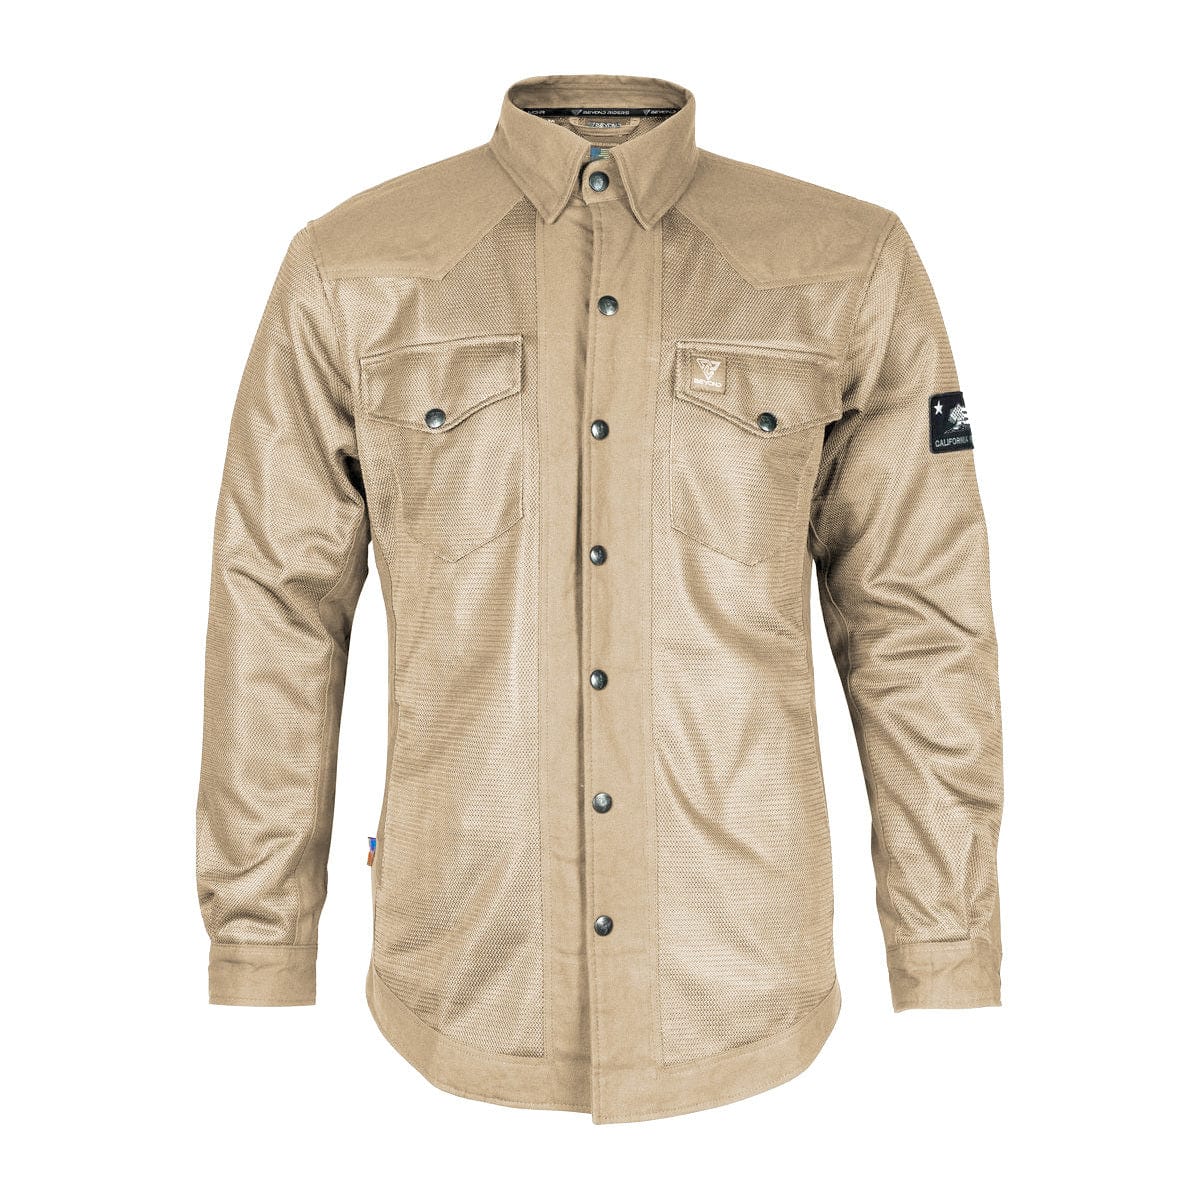 Protective Summer Mesh Shirt with Pads - Khaki Solid